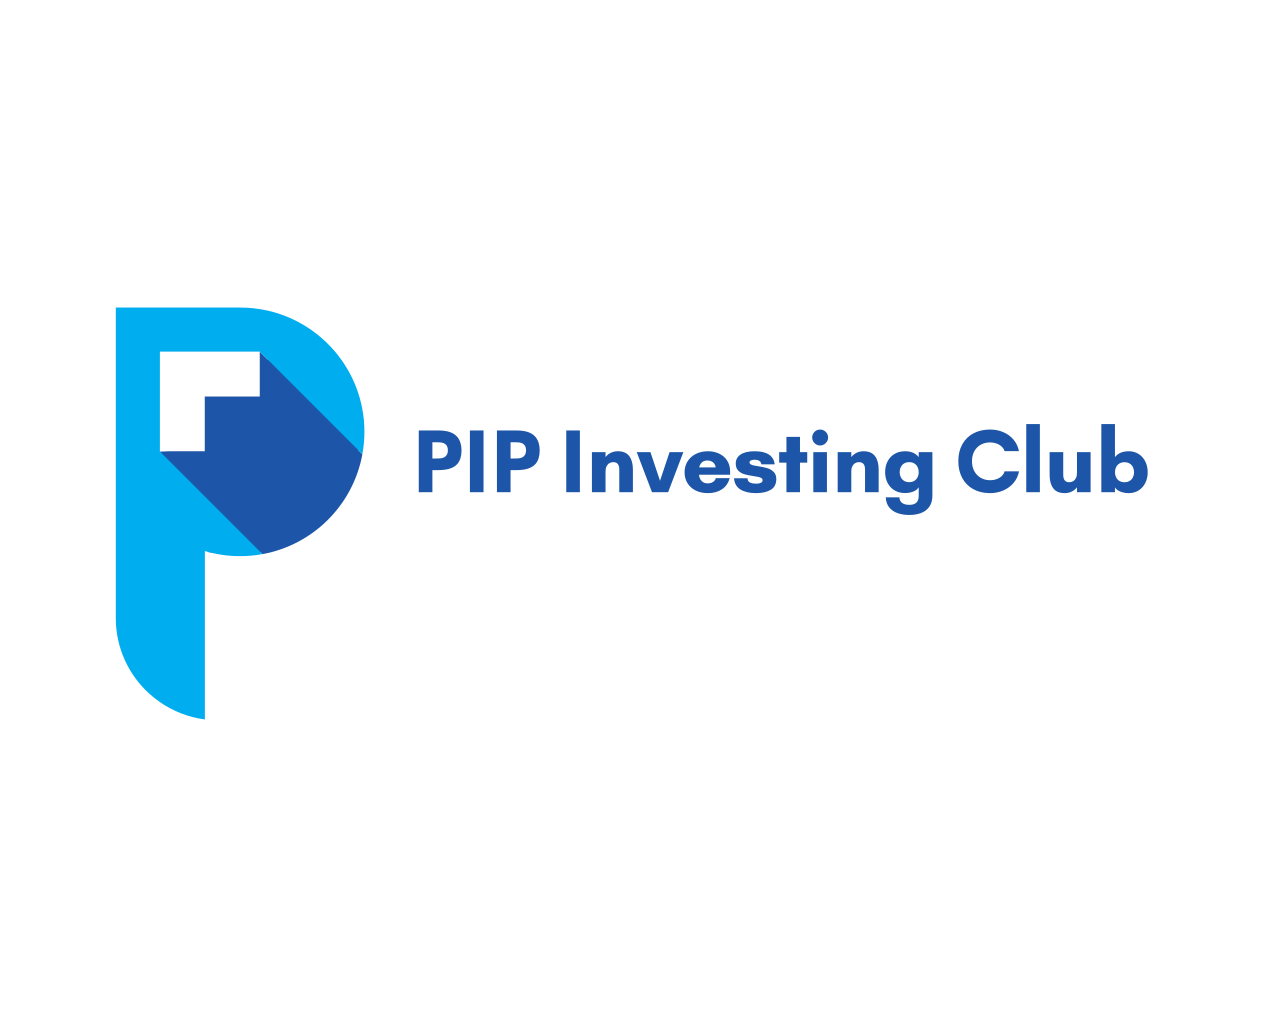  PIP Investing Club's web page